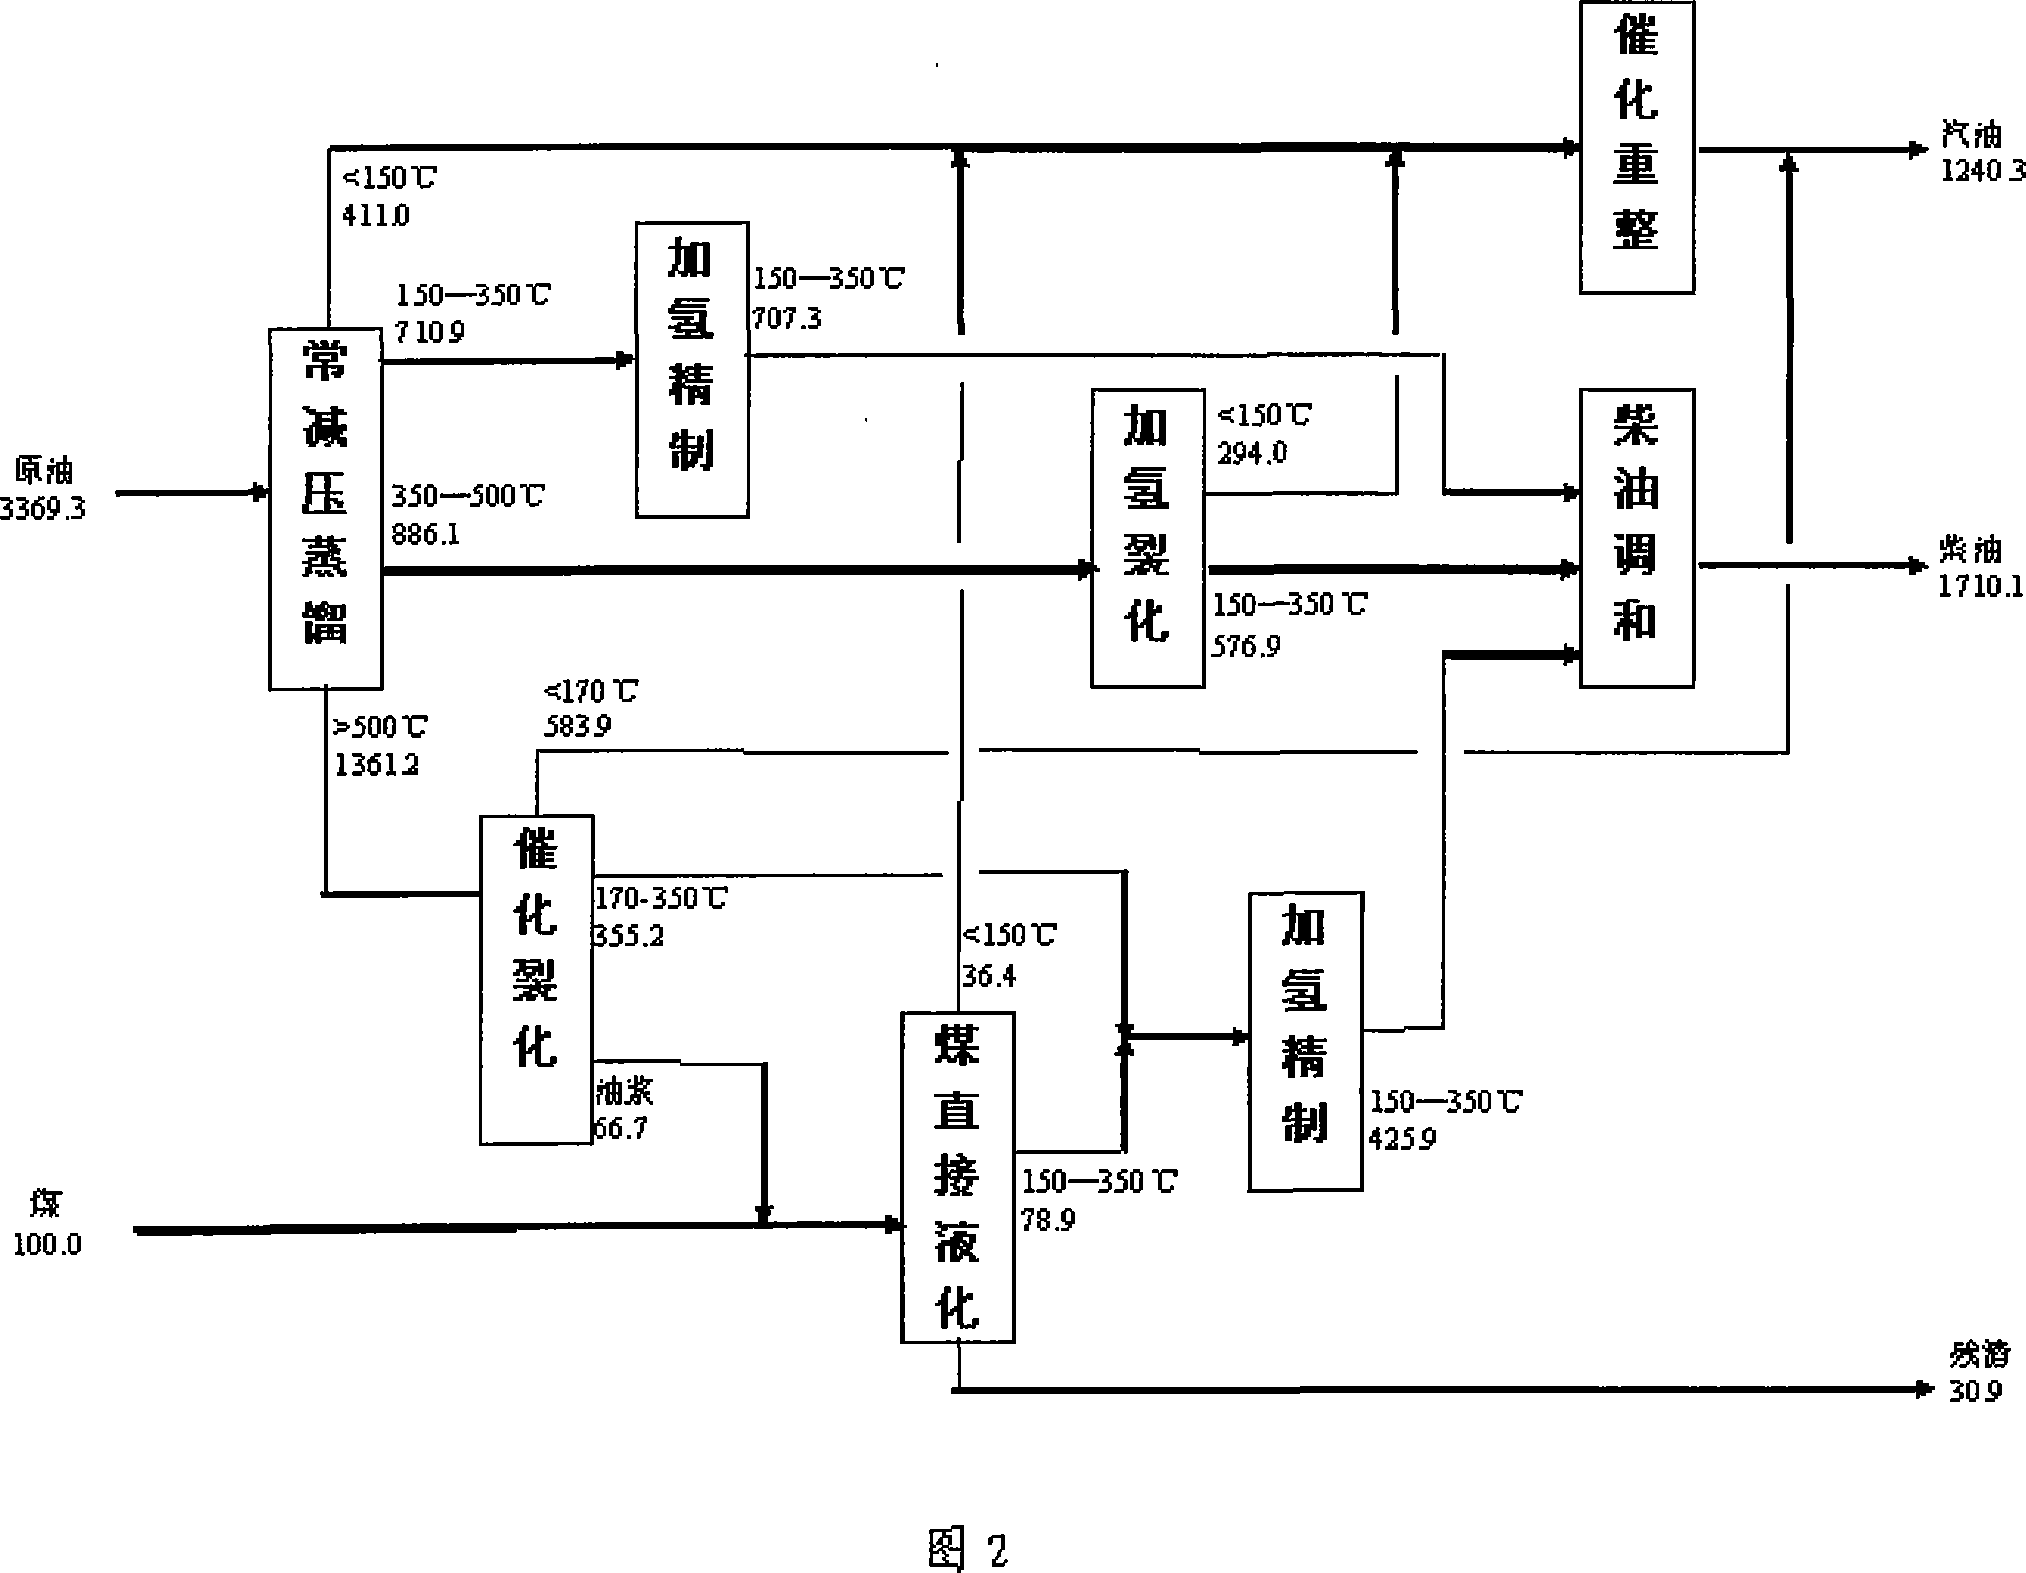 Coal and stone oil joint processing method for producing high quality engine fuel